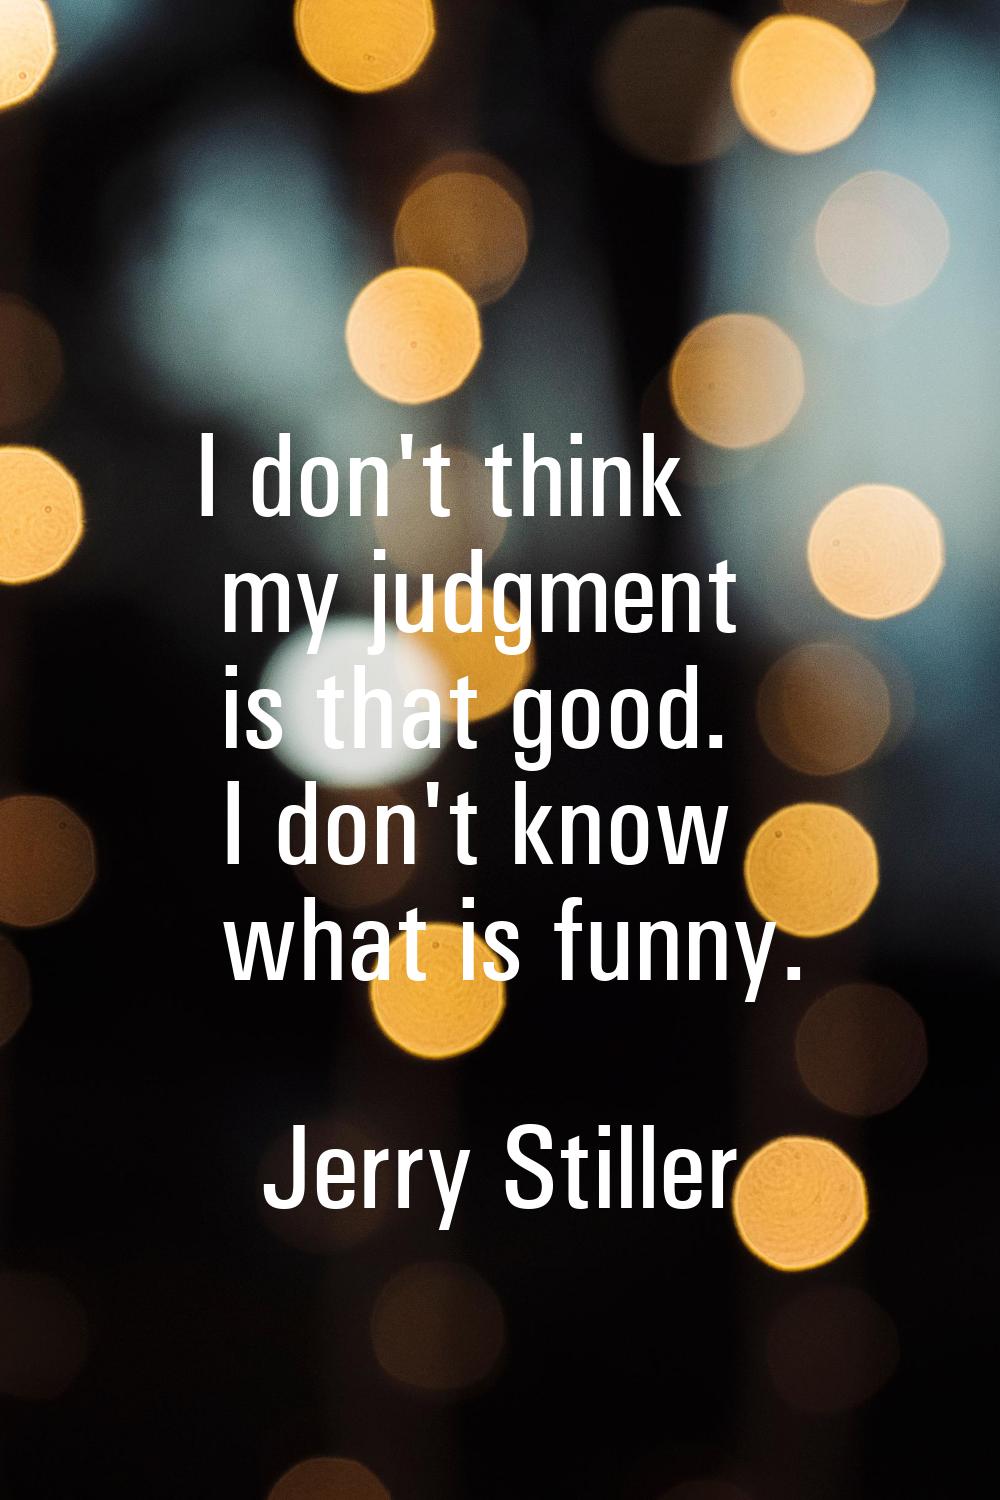 I don't think my judgment is that good. I don't know what is funny.